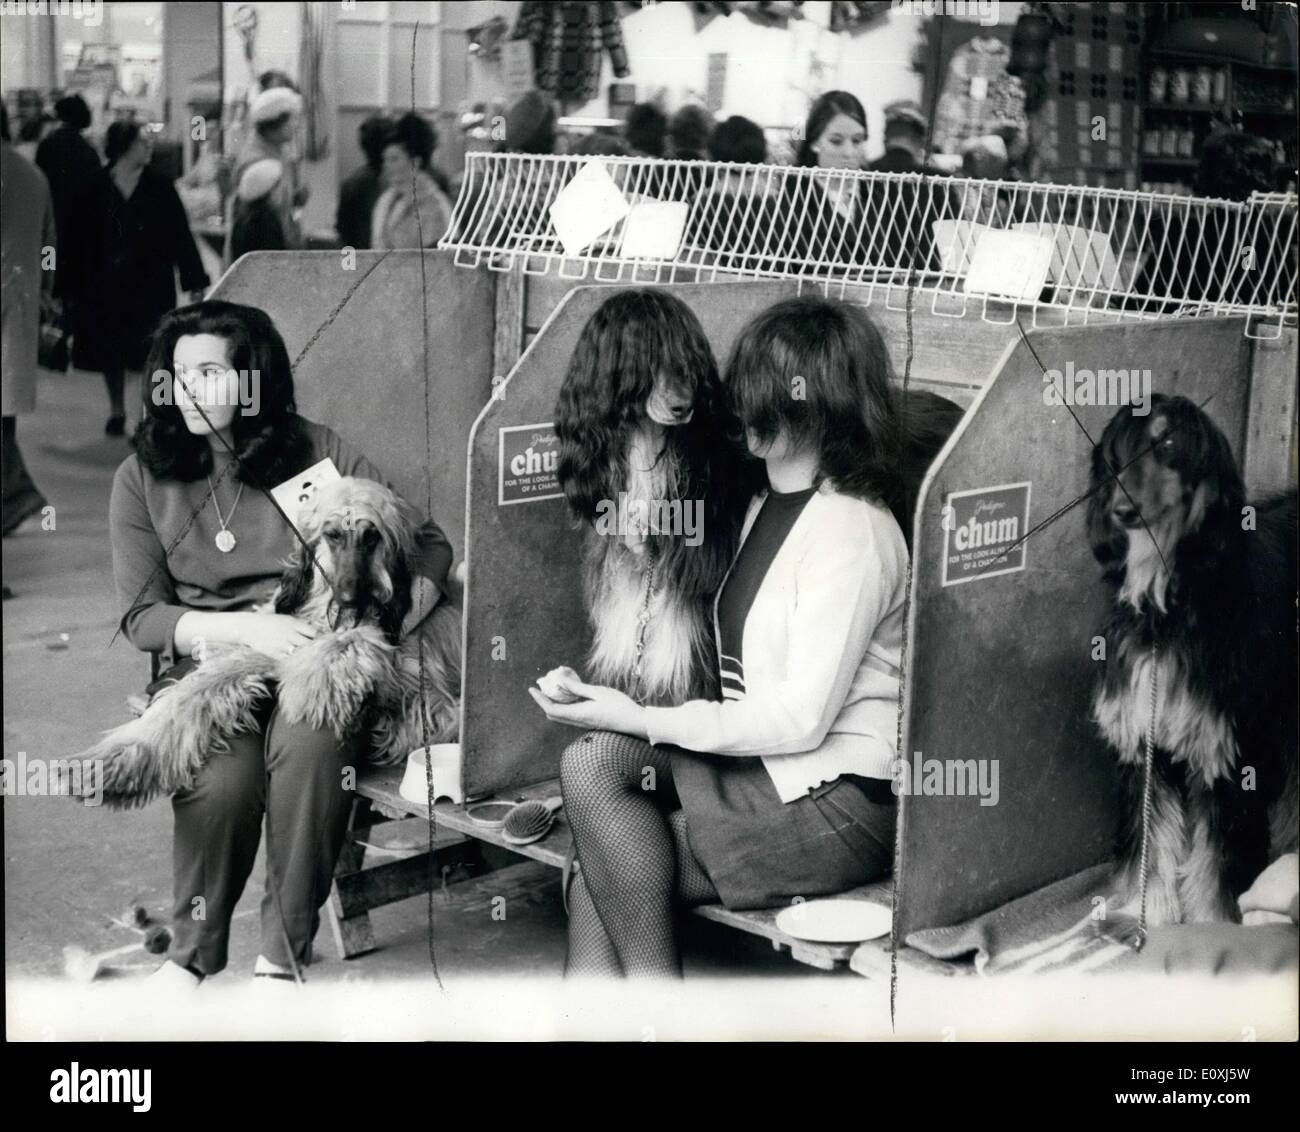 Feb. 02, 1967 - Cruft's All-Champion Dog Show Opens At Olympia: Record crowds and record exports were the summing-up at the first day of the Cruft's all-champion dog show which opened at Olympia yesterday. In all, 6,485 dogs will be shown in two days. Photo shows This afternoon hound seems to have imposed its personality on its owner as they on its owner as they sit waiting for the judging today. Stock Photo